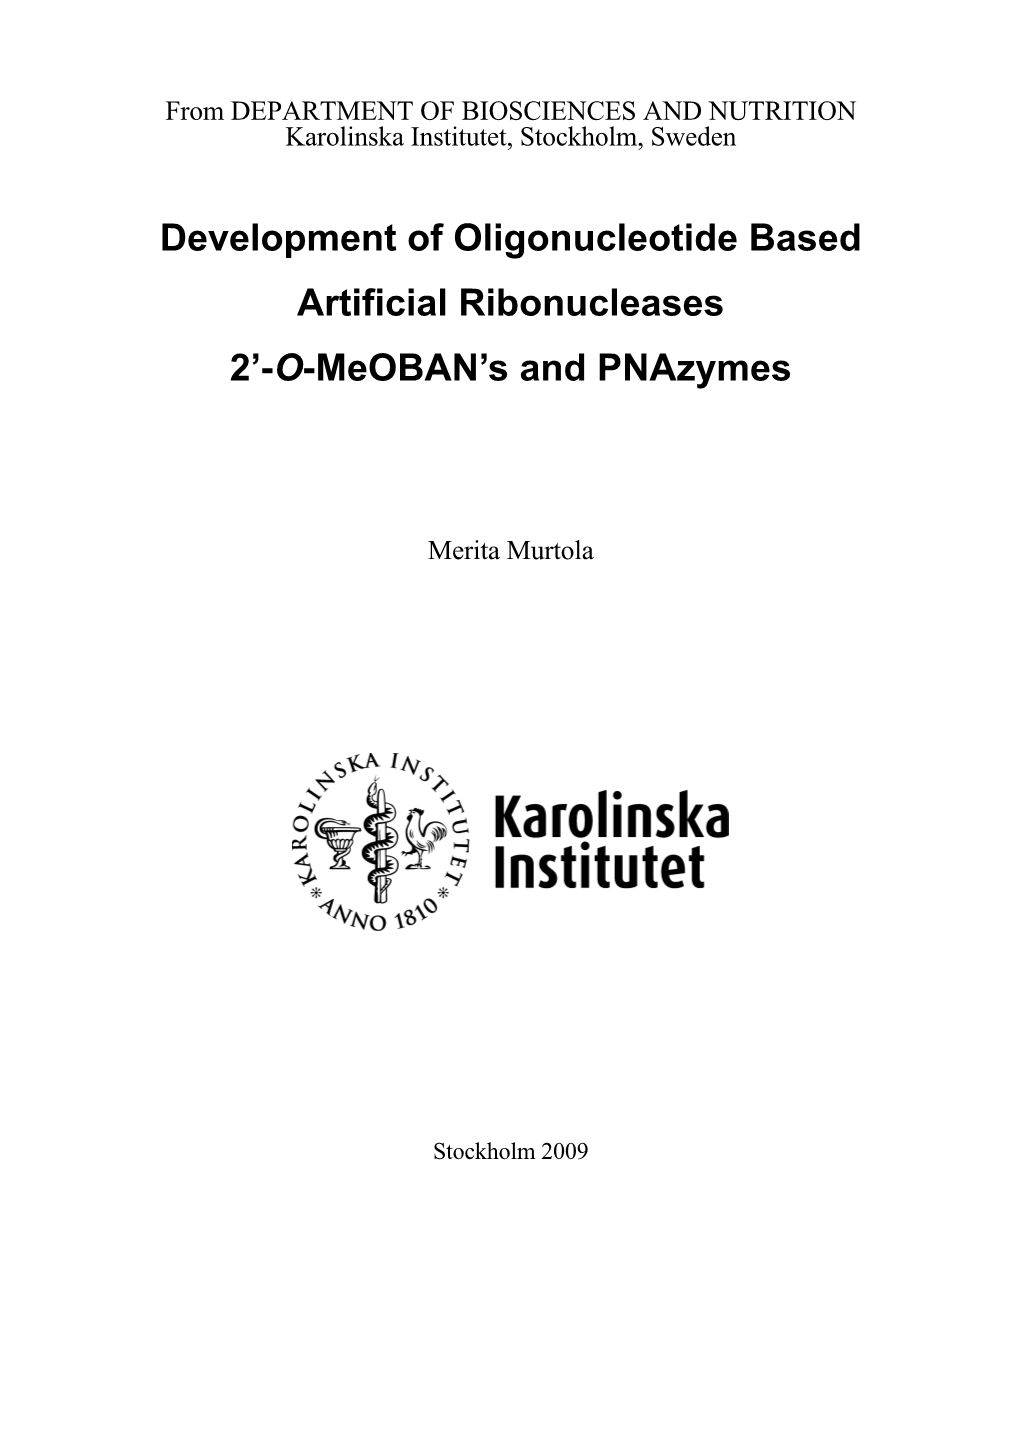 Development of Oligonucleotide Based Artificial Ribonucleases 2ʼ-O-Meoban’S and Pnazymes